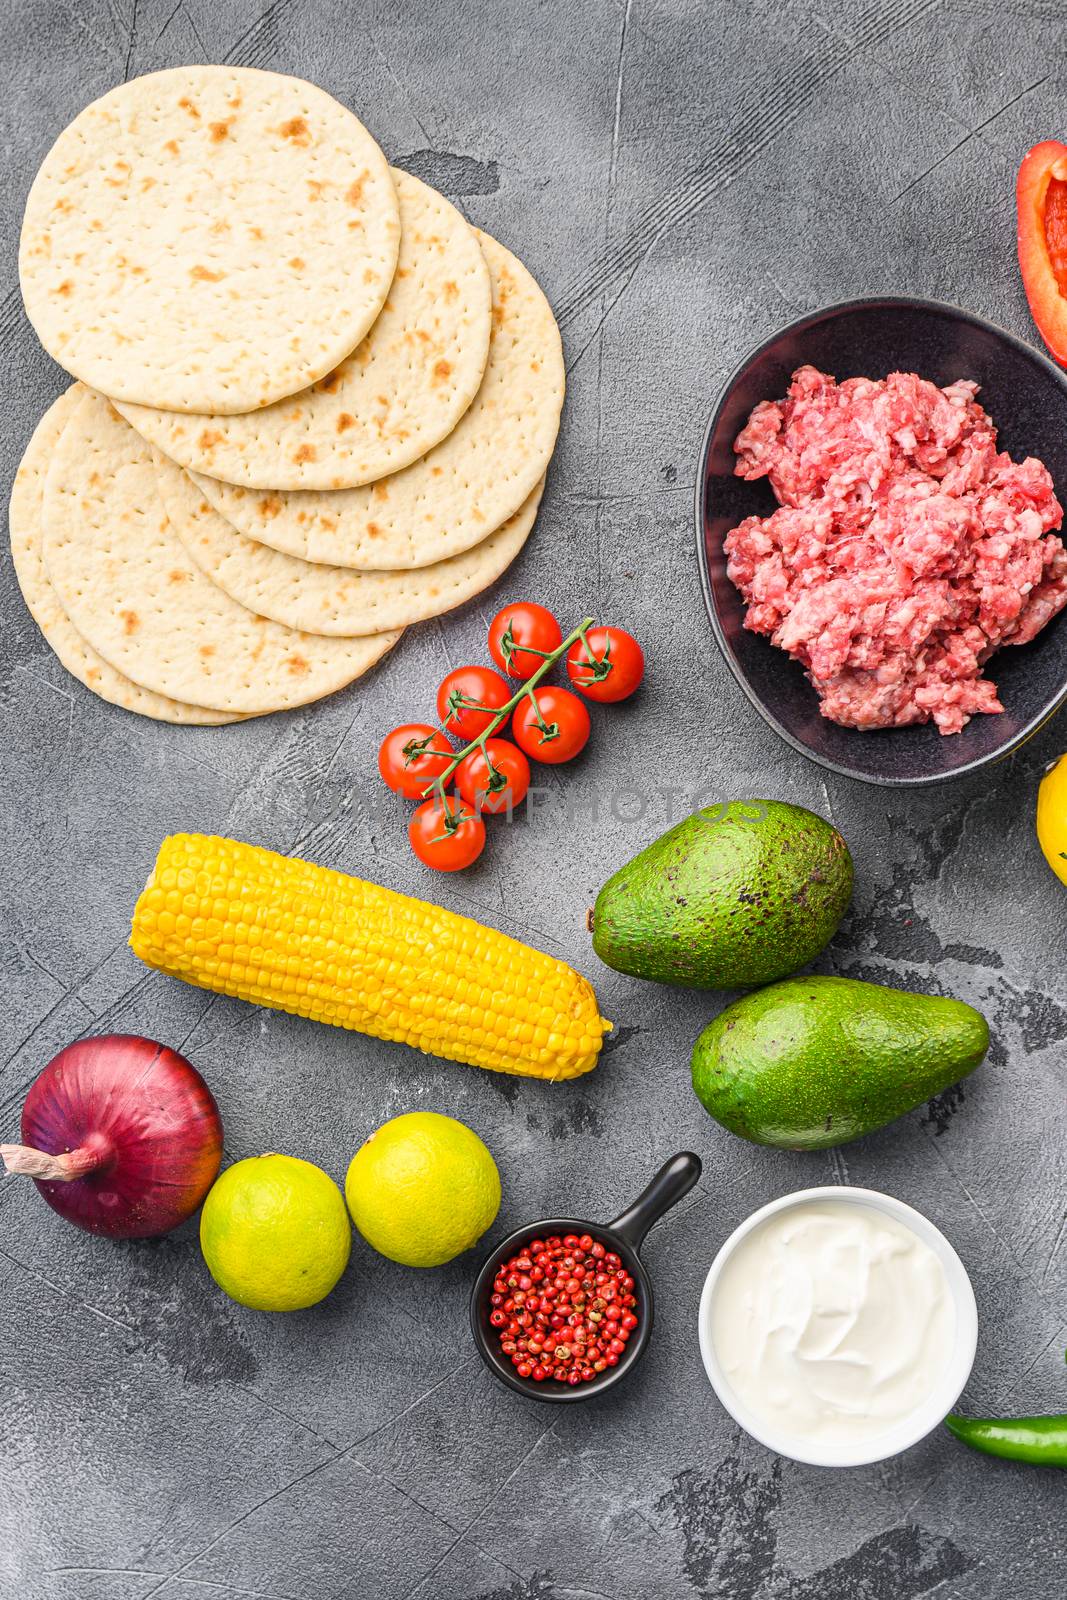 Ingredients for meat mexican tacos , corn tortillas, chili pepper, avocado, meat on textured grey background, top view. by Ilianesolenyi